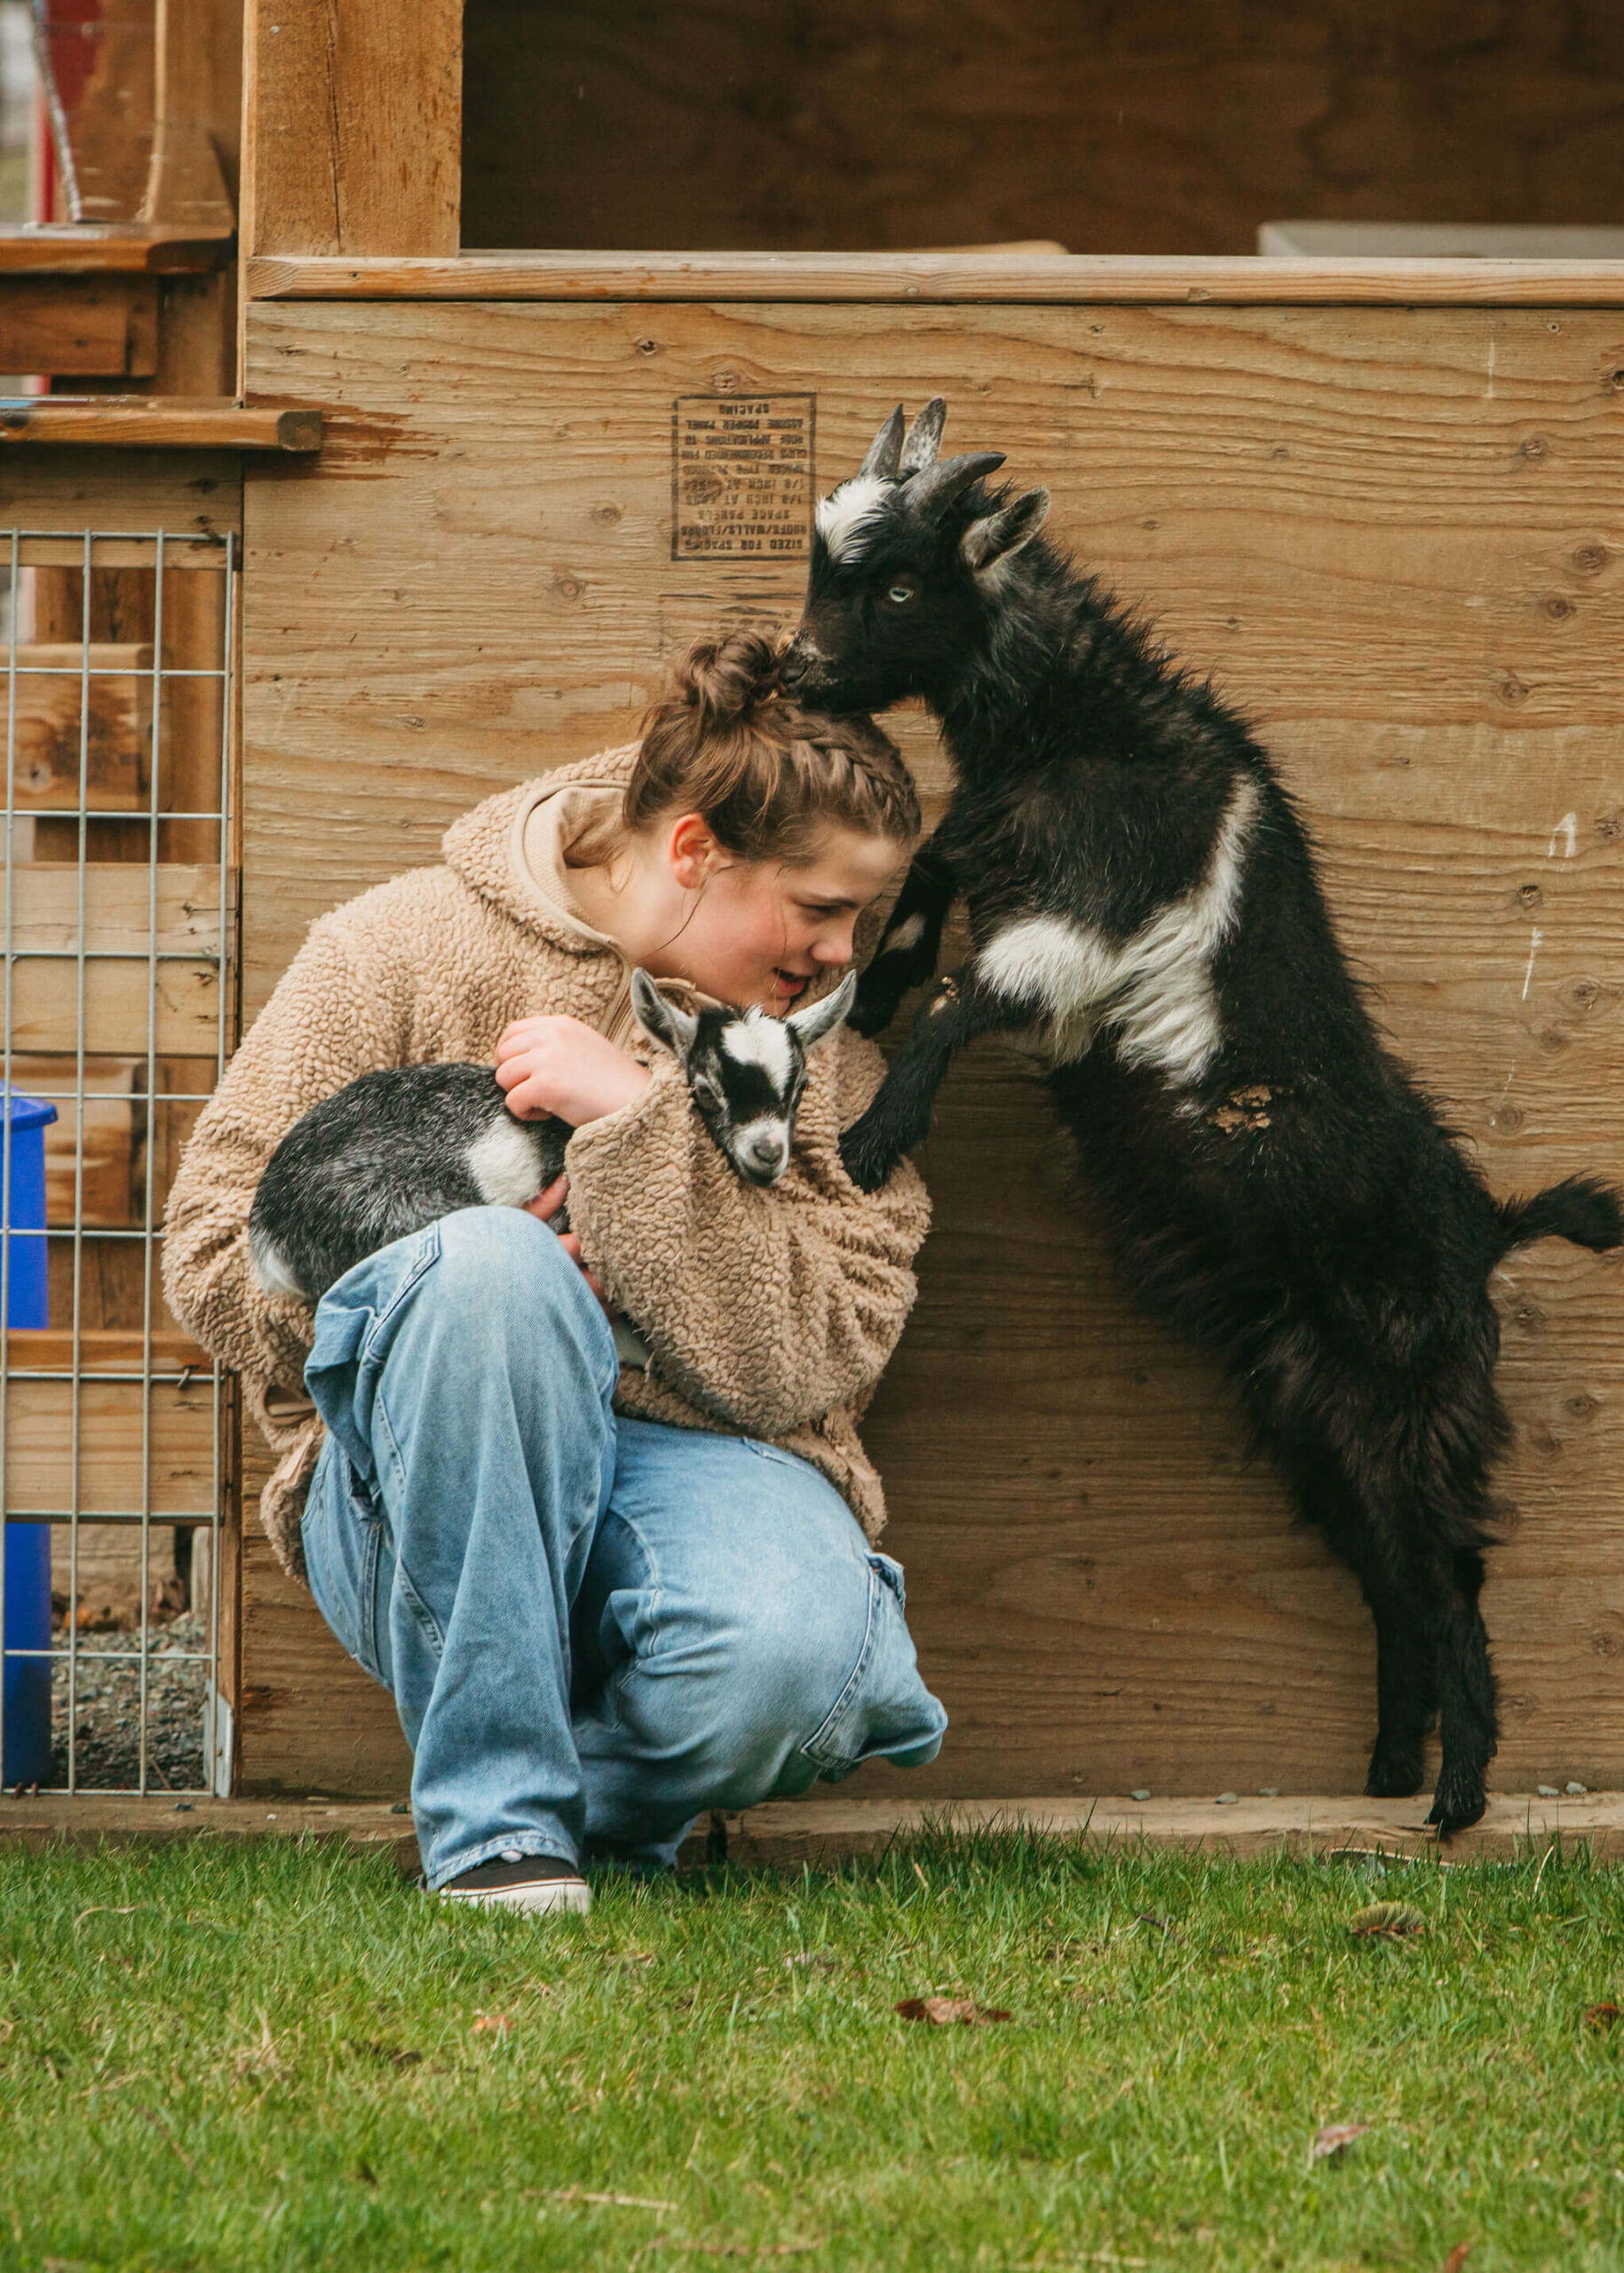 A woman gently cradling a baby goat in her arms, while a larger goat sniffs her head gently